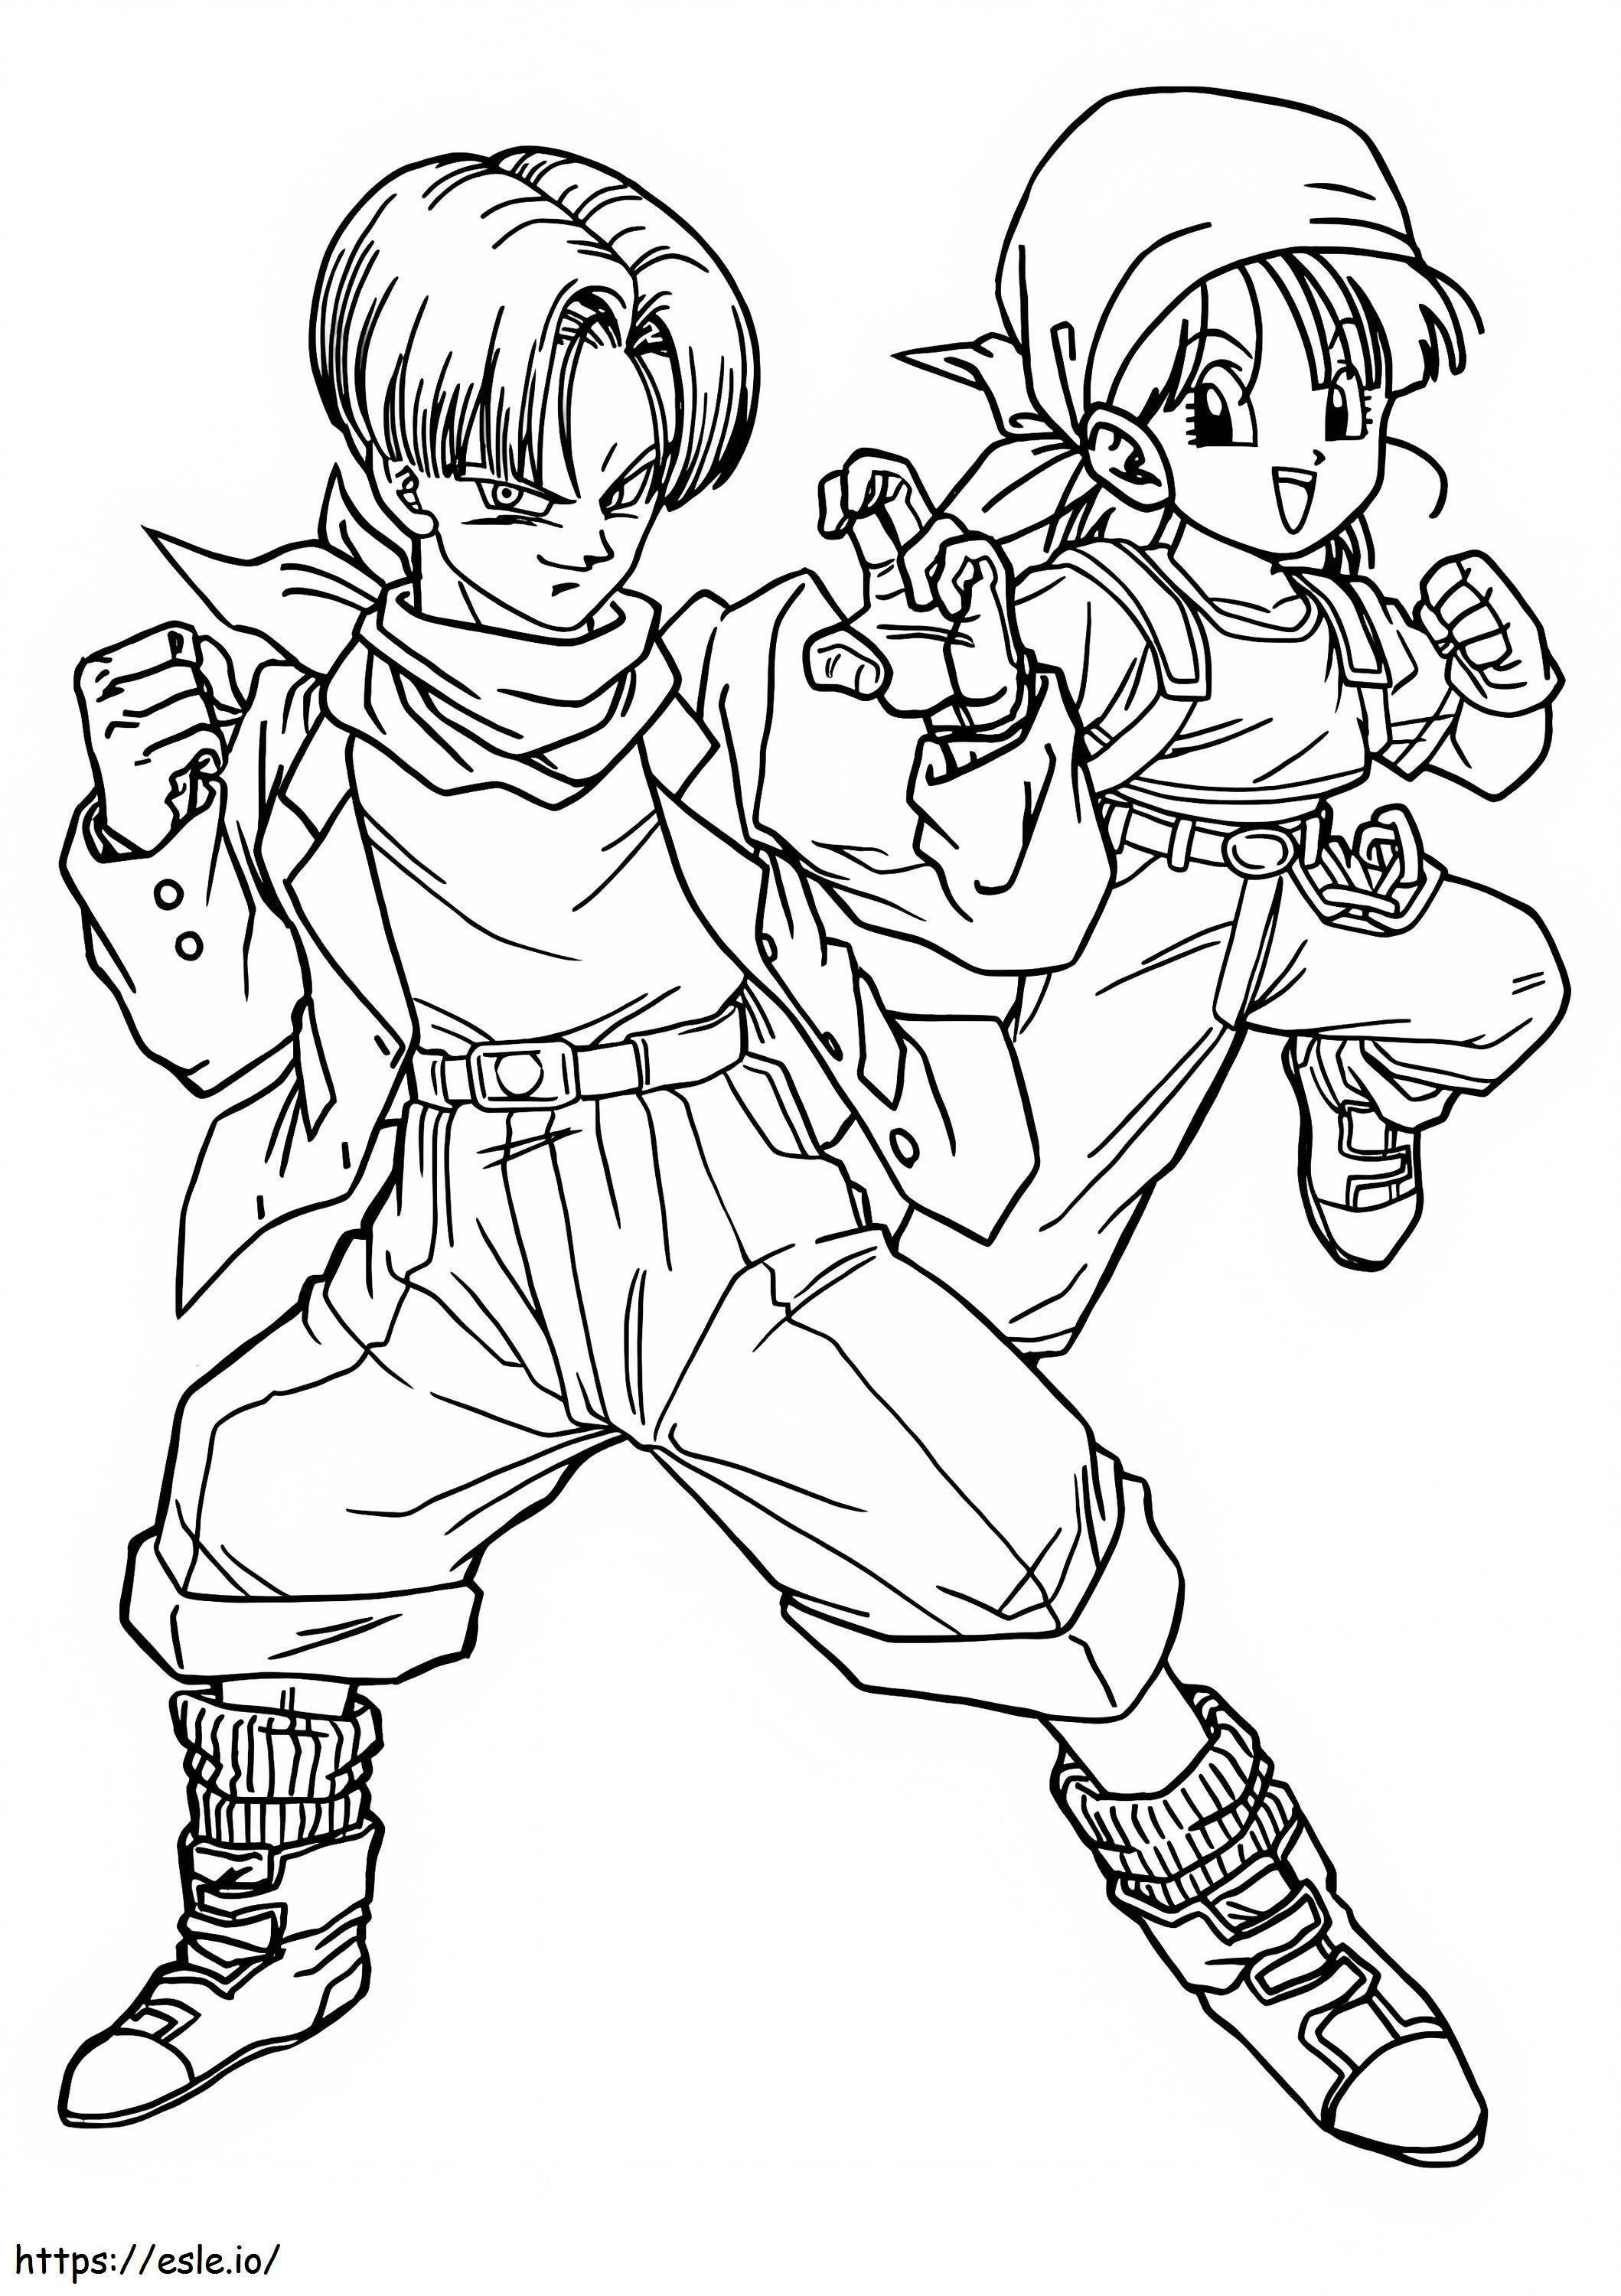 Trunks And Little Bulma coloring page